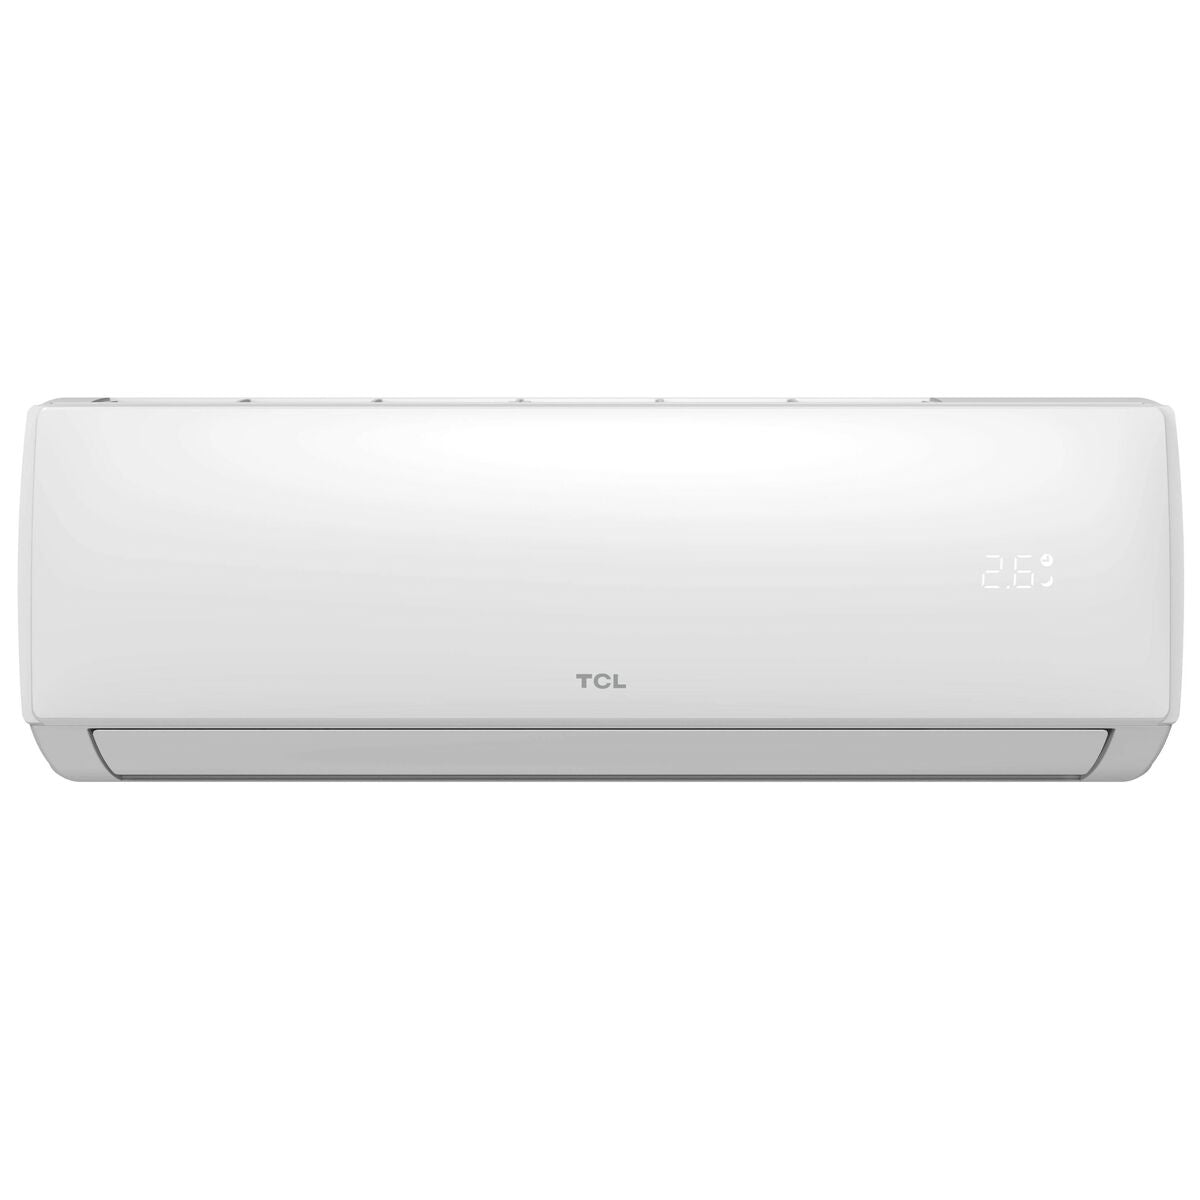 Air Conditioning TCL S24F2S1 White A++, TCL, Home and cooking, Portable air conditioning, air-conditioning-tcl-s24f2s1-white-a, Brand_TCL, category-reference-2399, category-reference-2450, category-reference-2451, category-reference-t-19656, category-reference-t-21087, category-reference-t-25214, category-reference-t-29111, Condition_NEW, ferretería, Price_800 - 900, summer, RiotNook